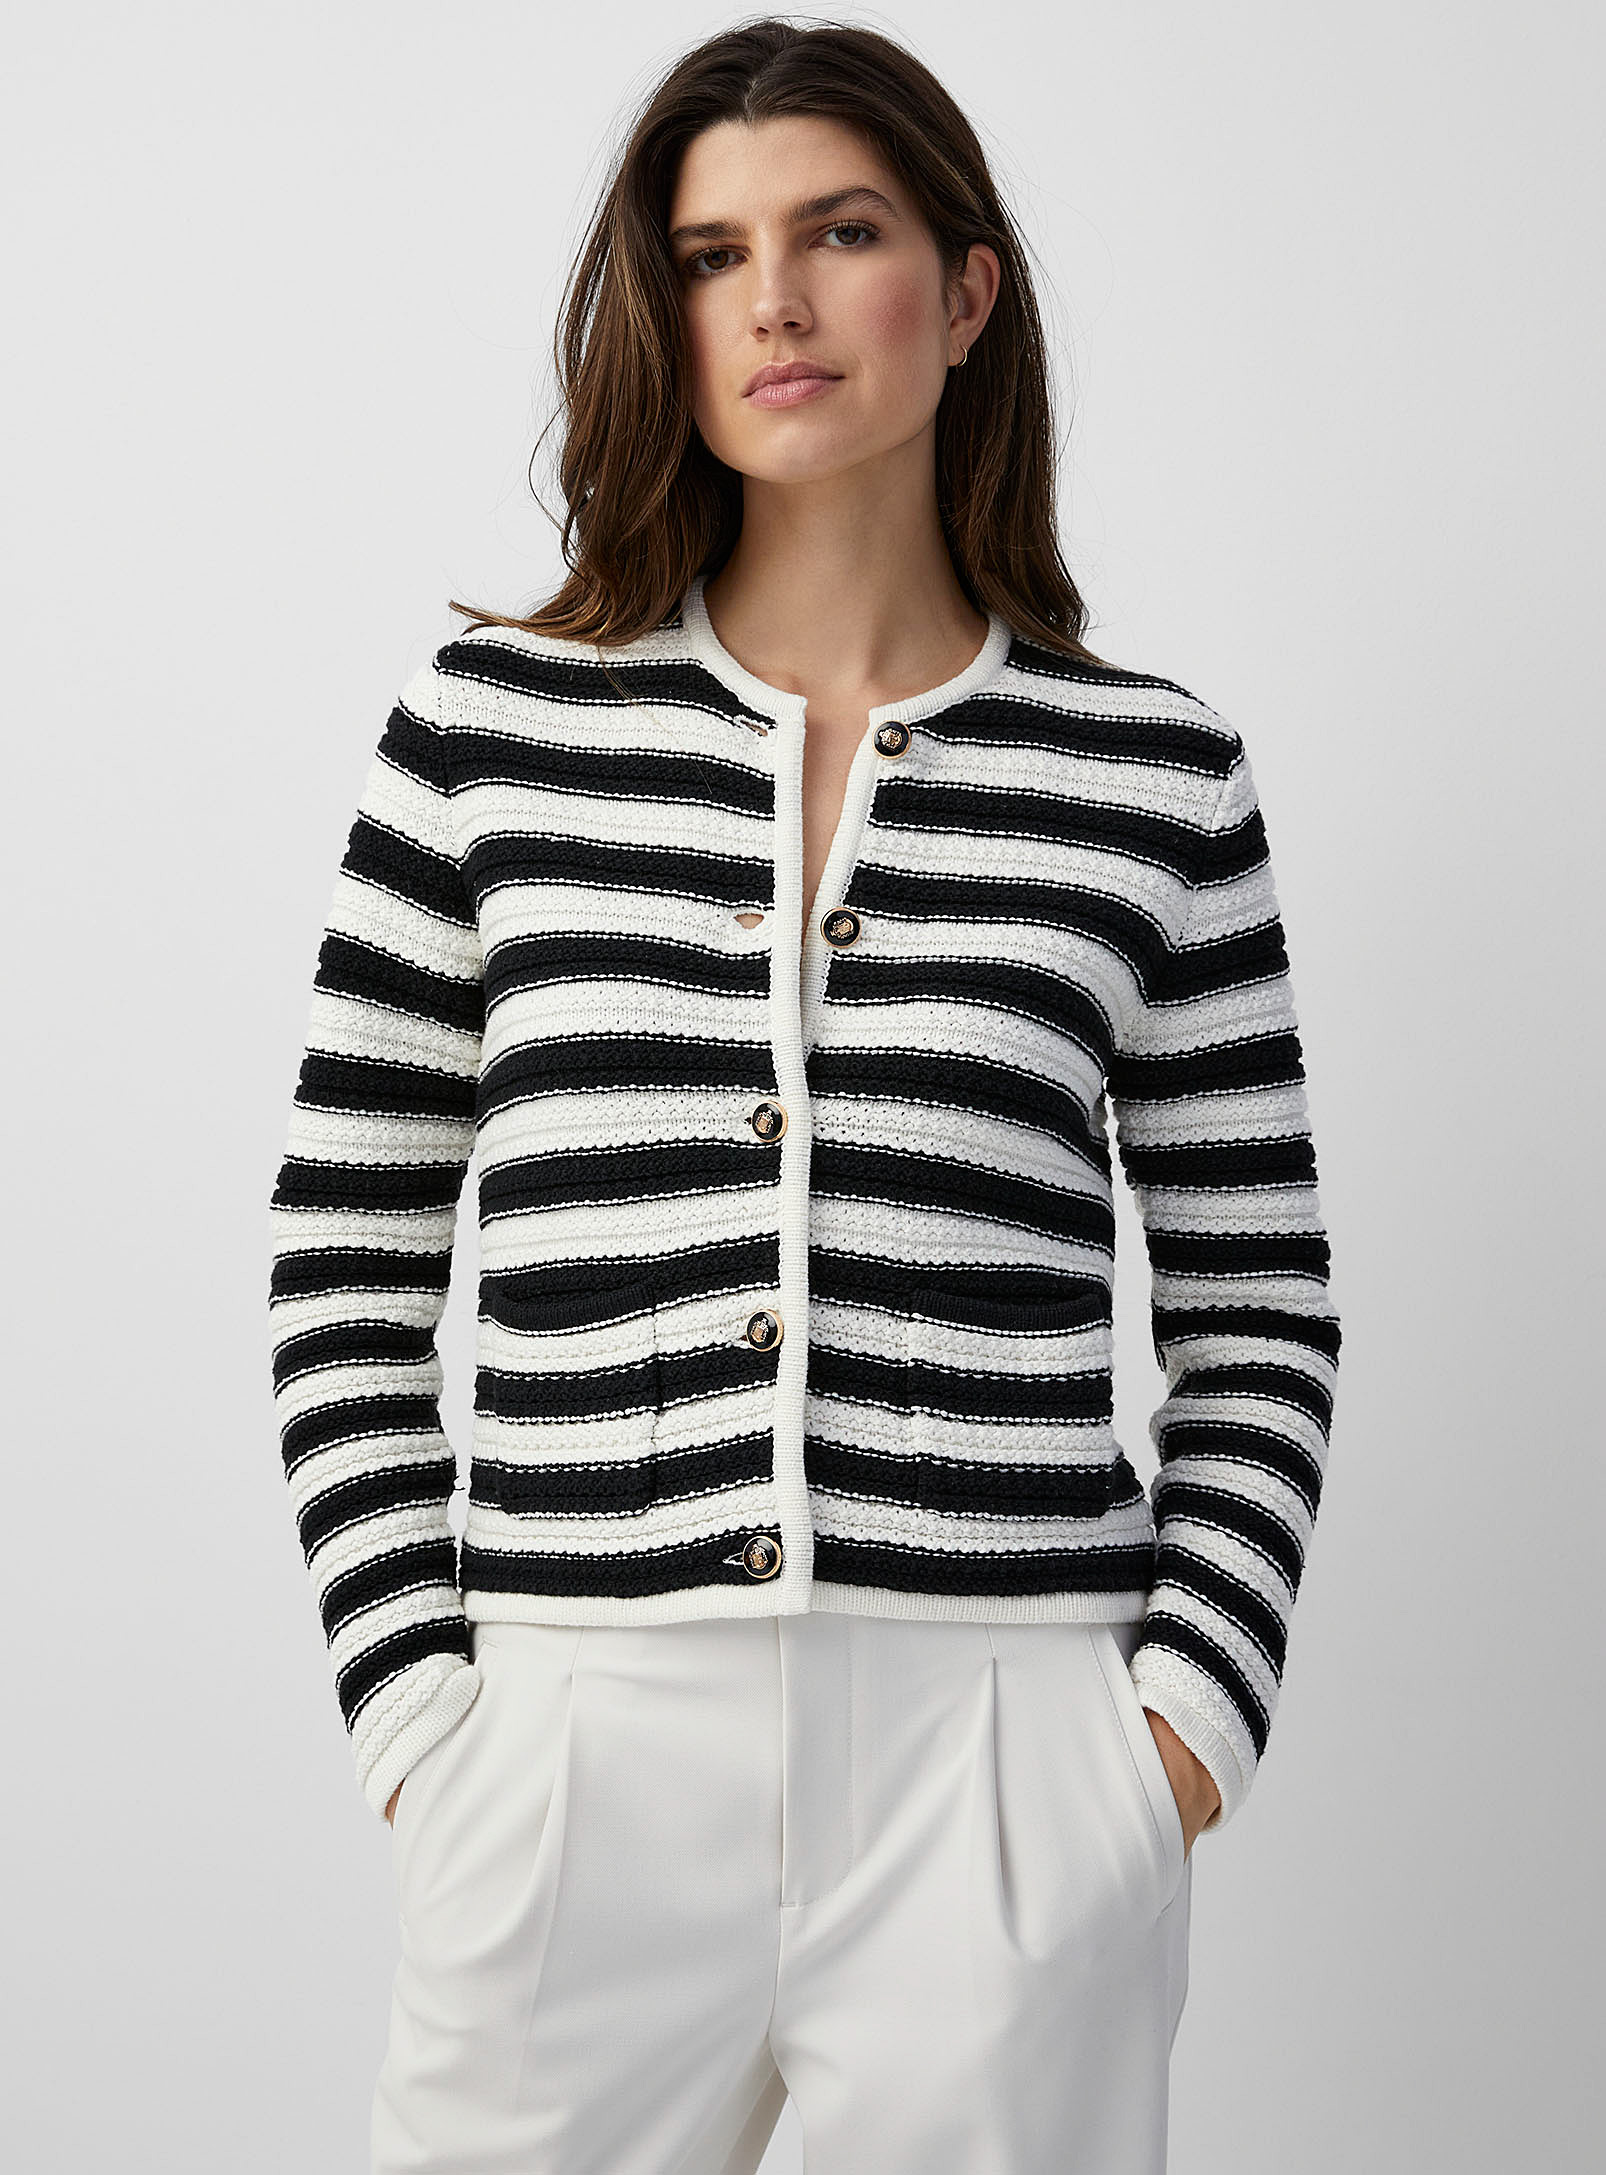 Contemporaine Crest Buttons Textured Cardigan In Black And White